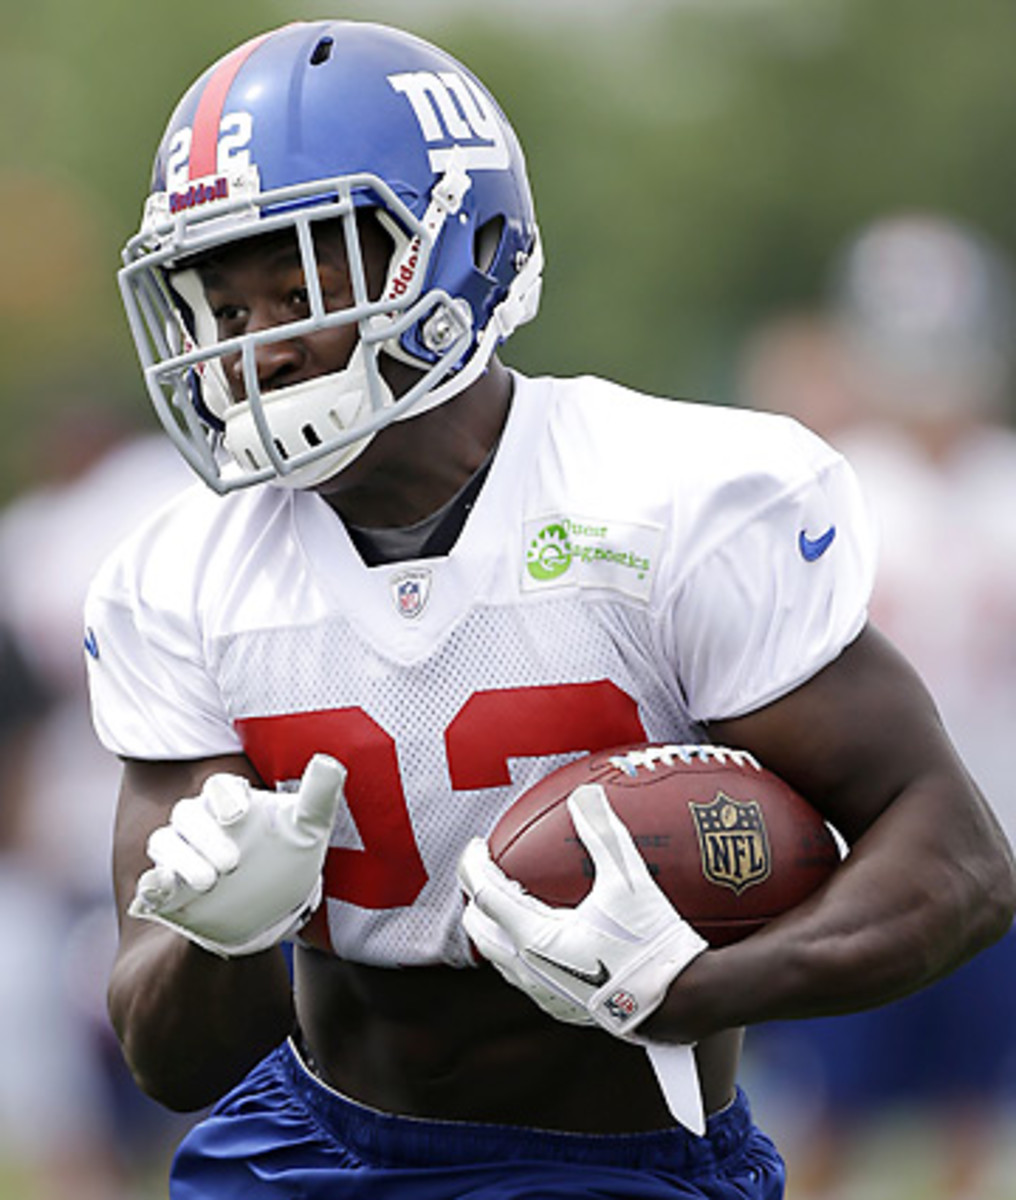 David Wilson will have to step up his pass protection if he wants to be the Giants' next feature back. (Seth Wenig/AP)